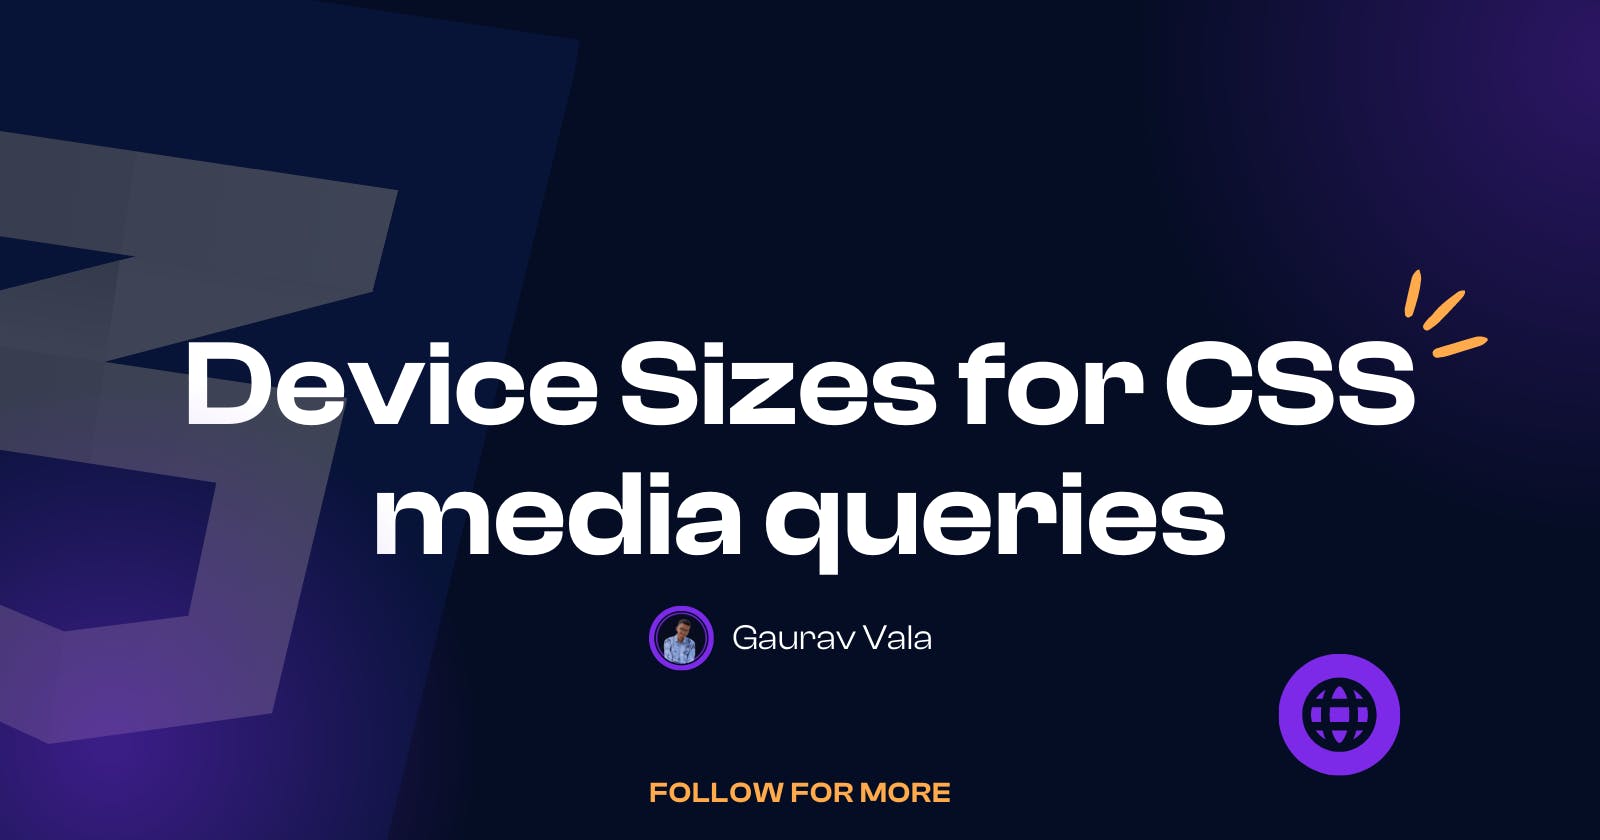 Device Sizes for CSS Media Queries